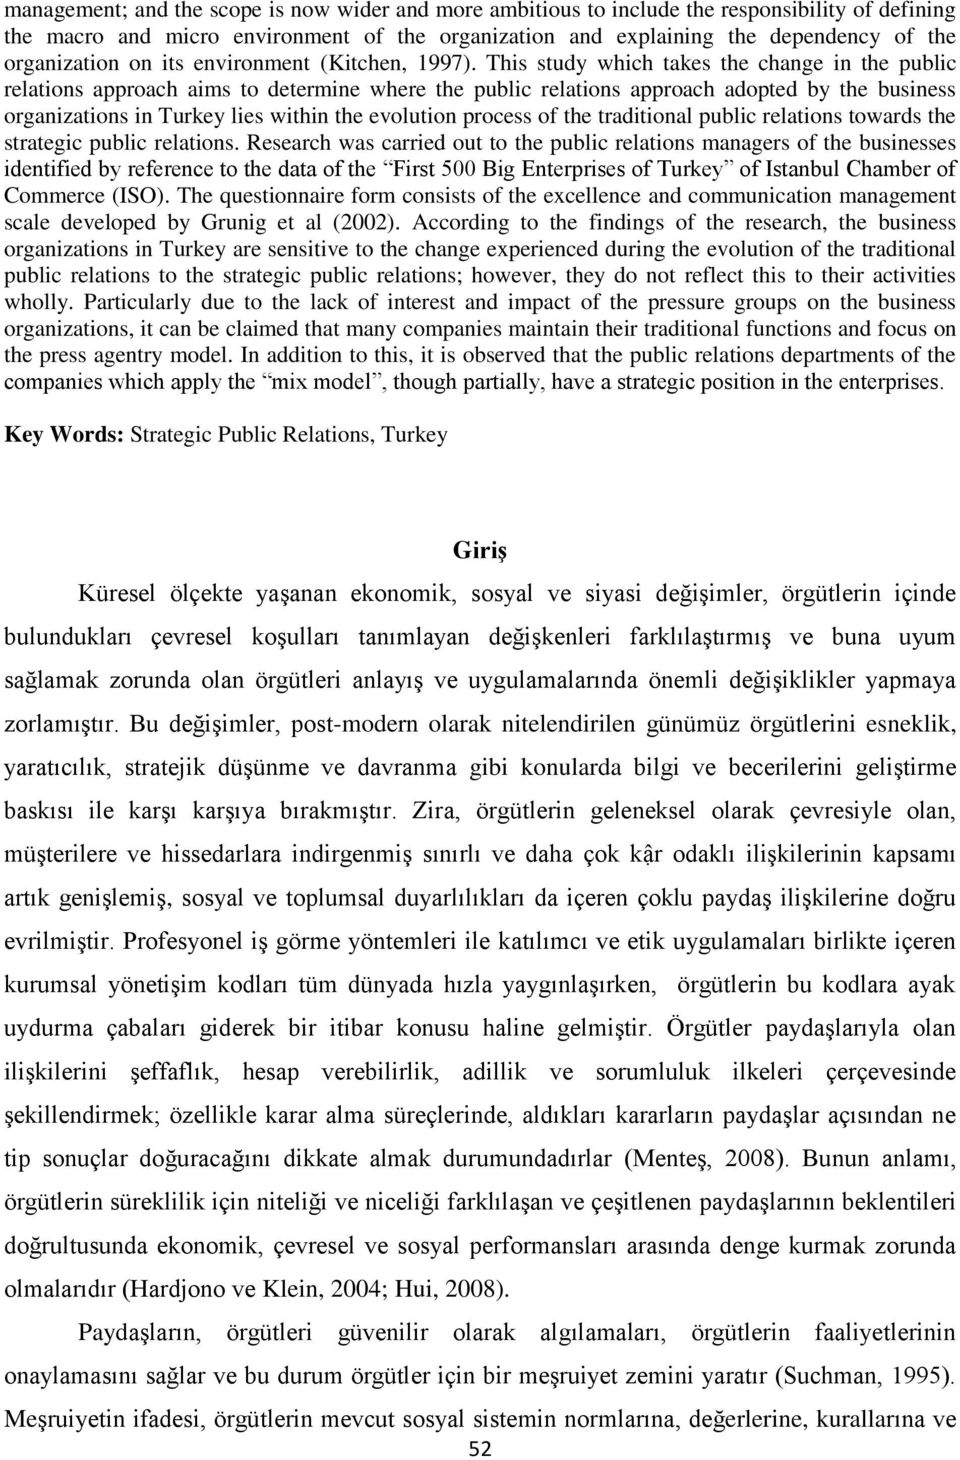 This study which takes the change in the public relations approach aims to determine where the public relations approach adopted by the business organizations in Turkey lies within the evolution